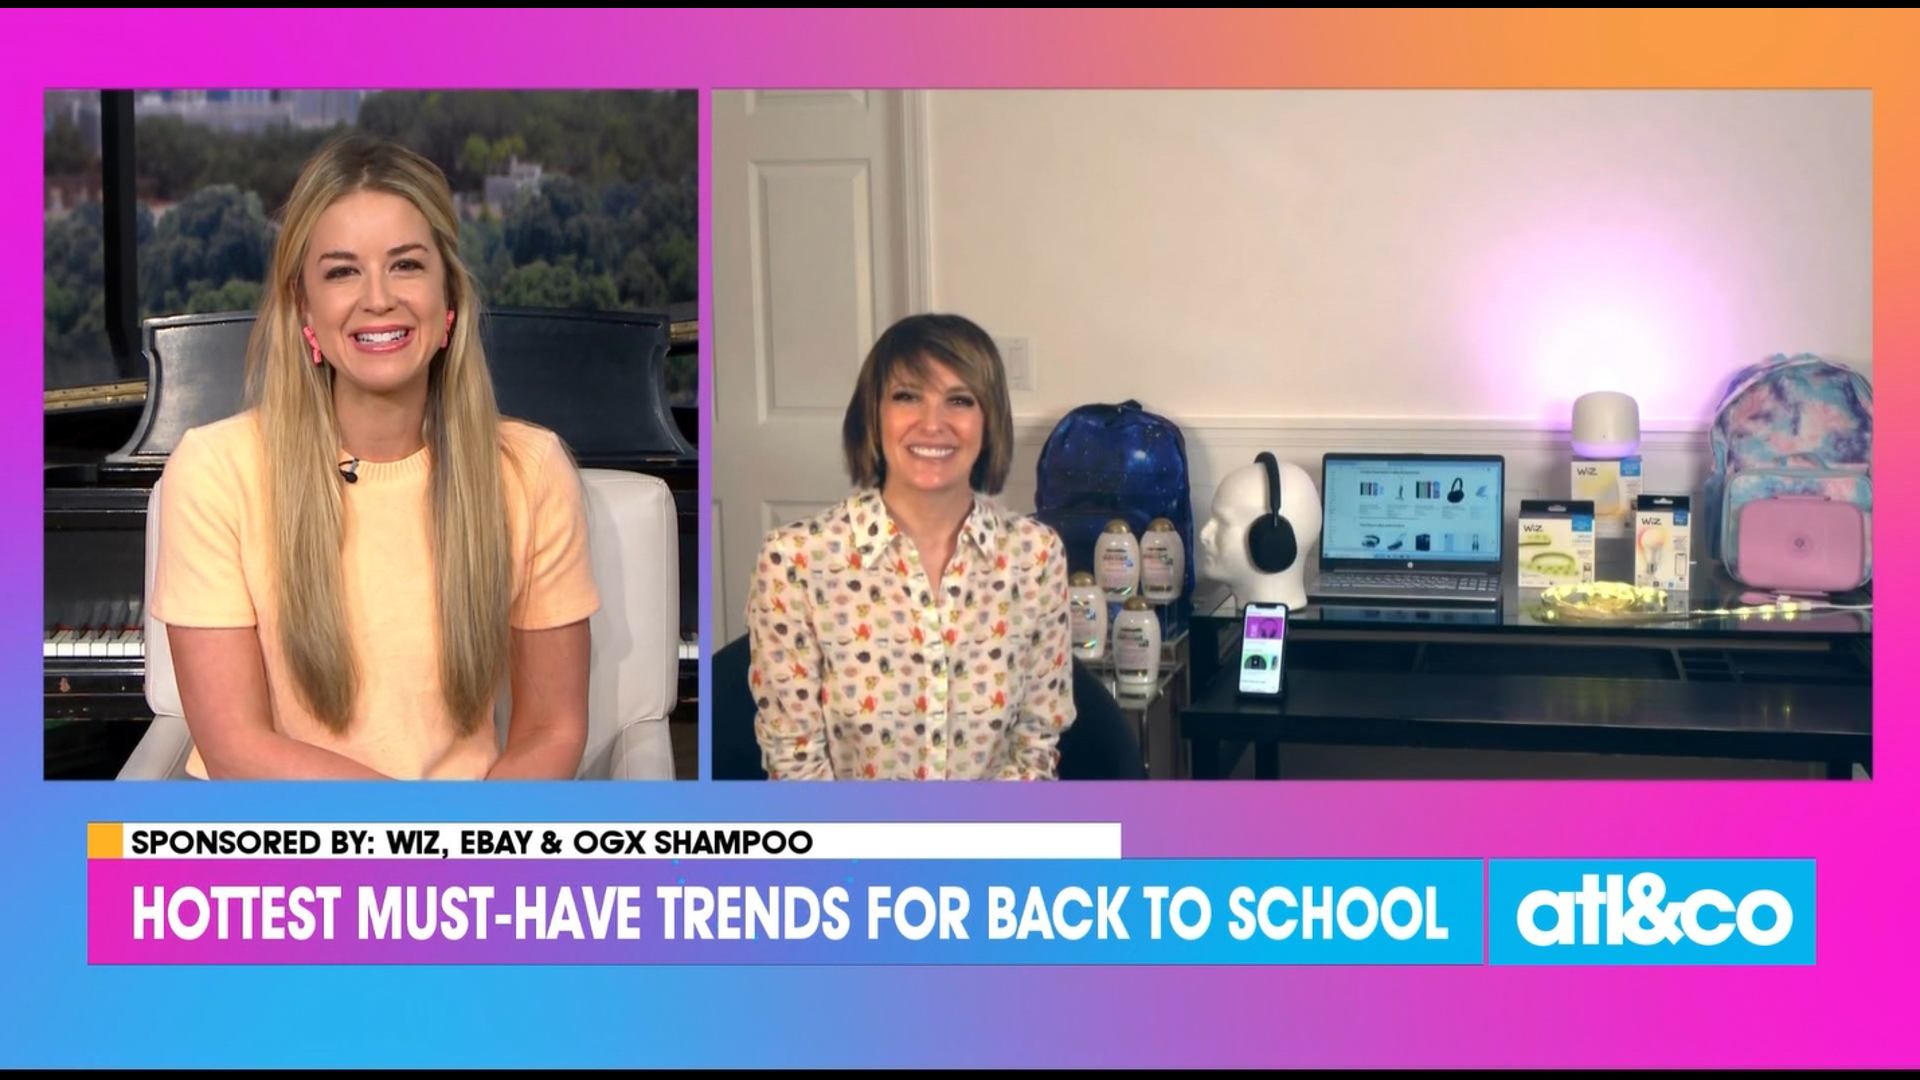 Lifestyle editor Joann Butler shares back to school essentials for all ages.